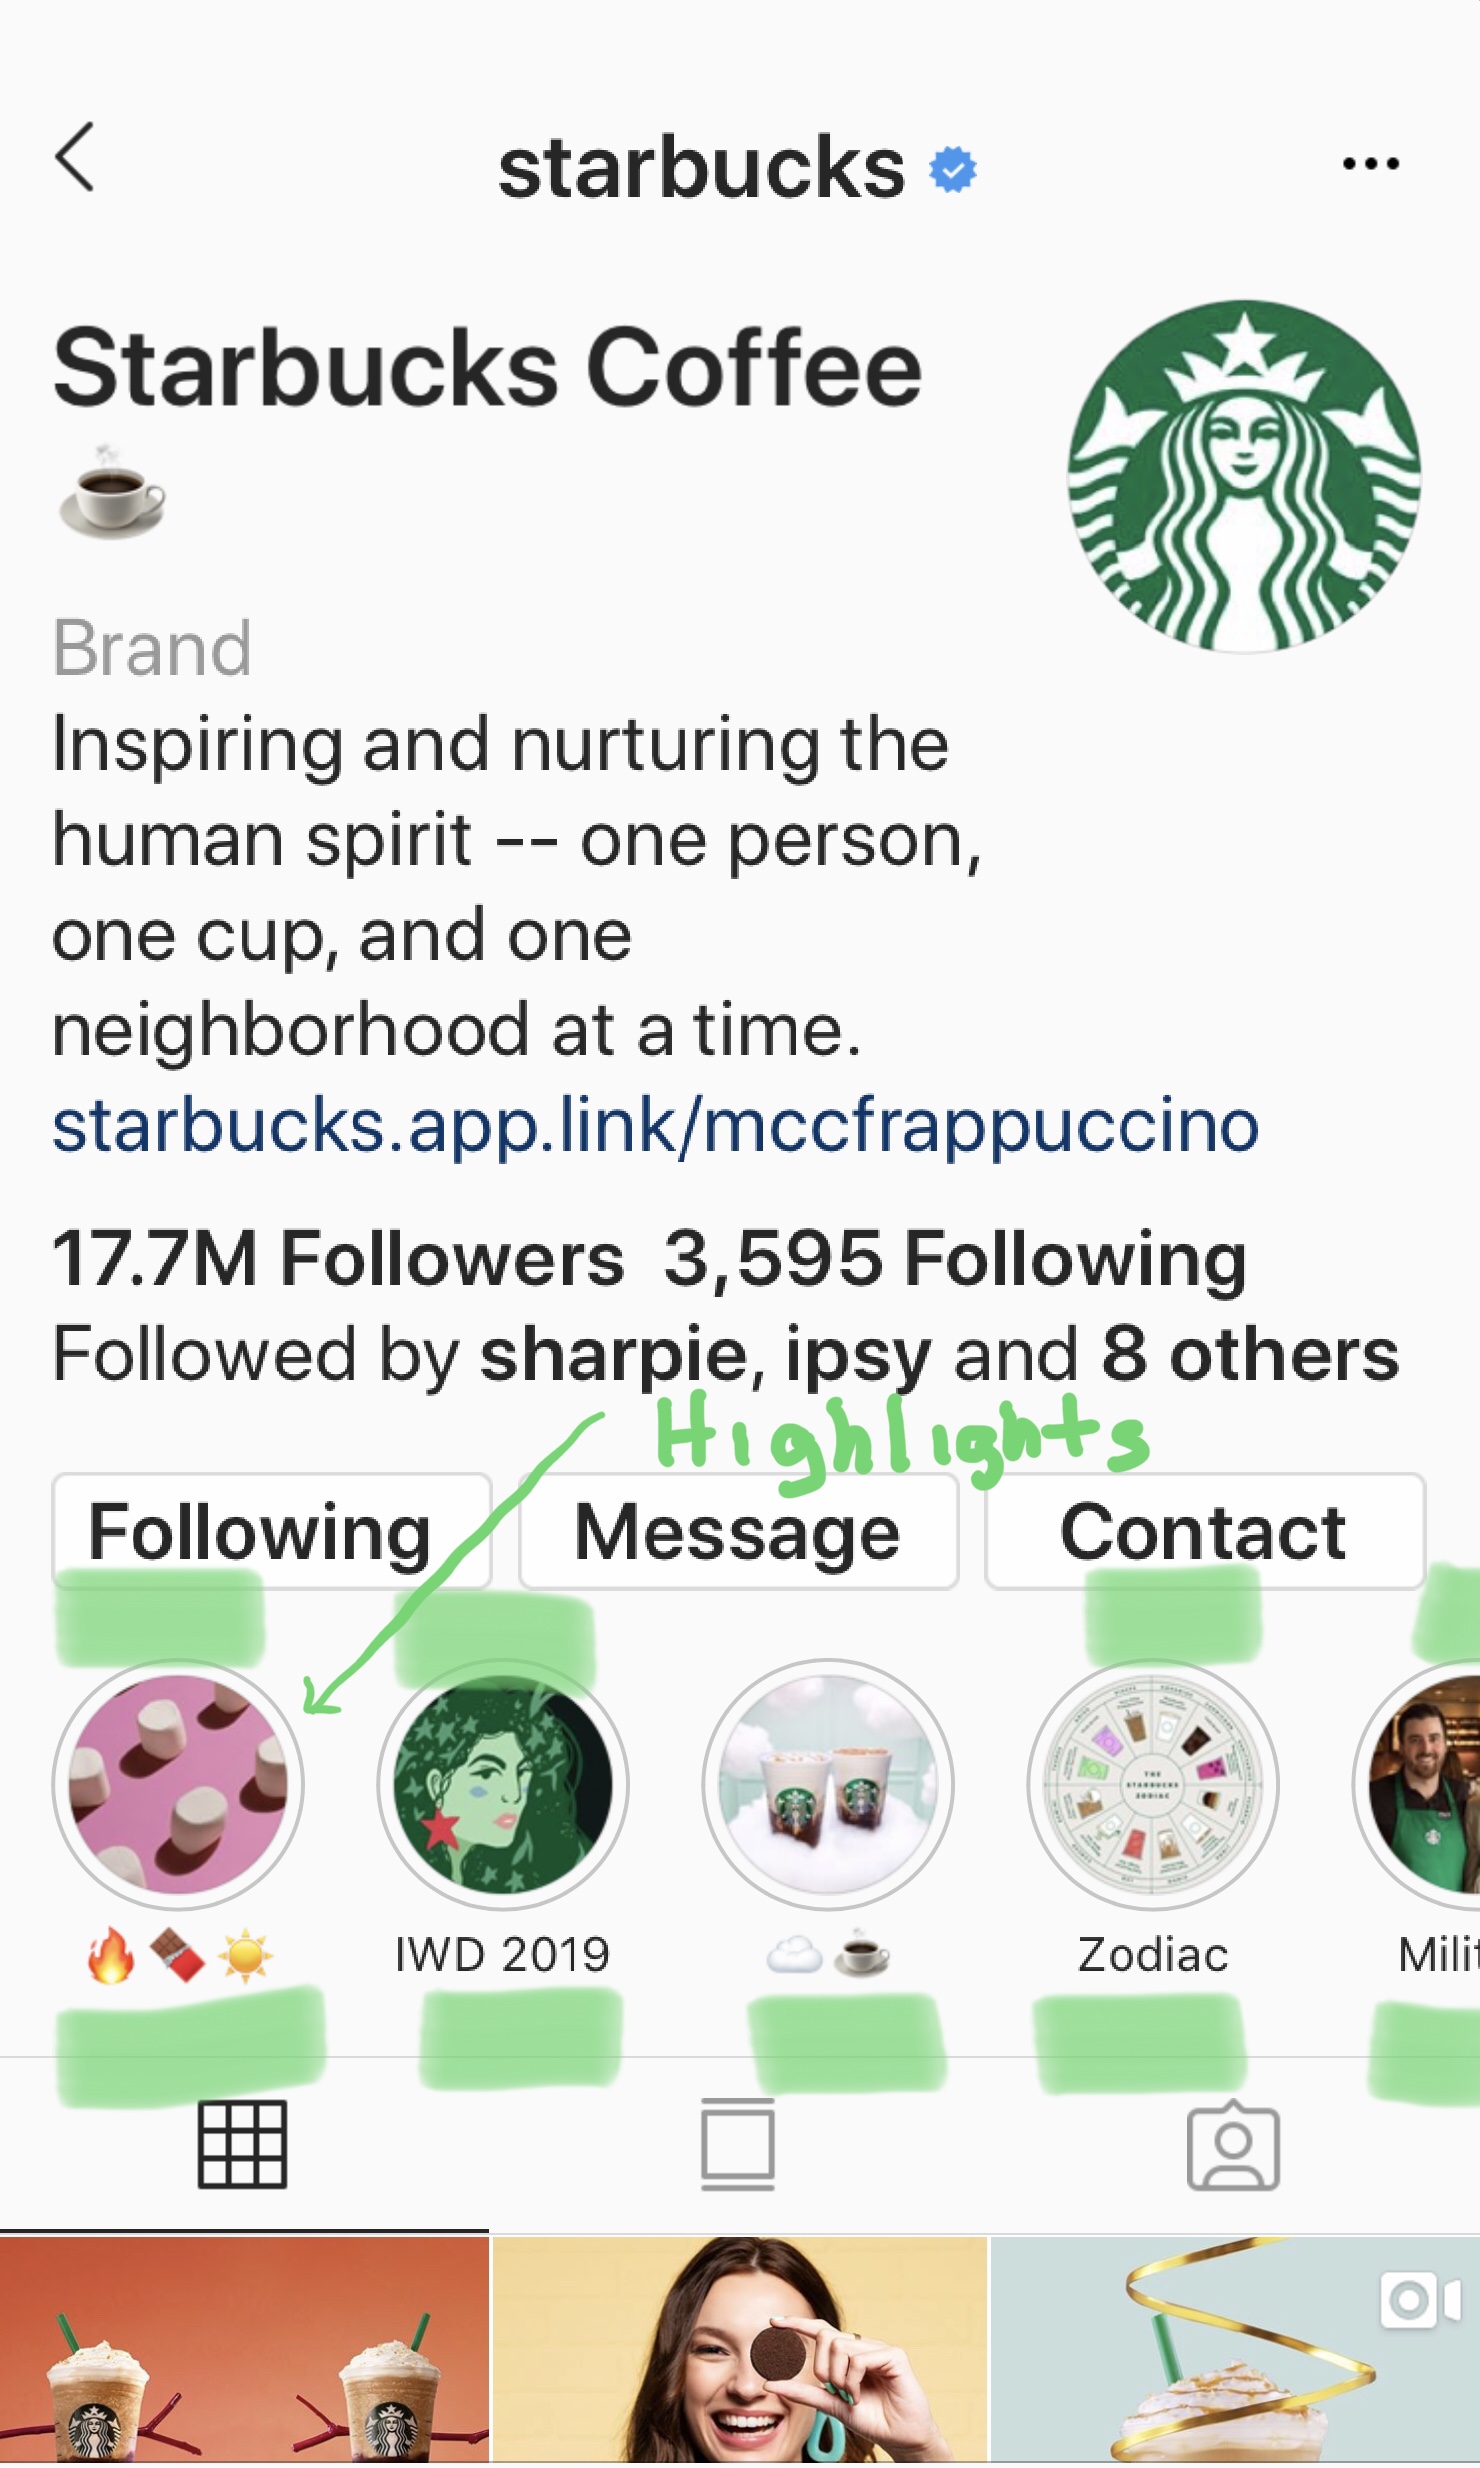 What are Stories Highlights Starbucks example